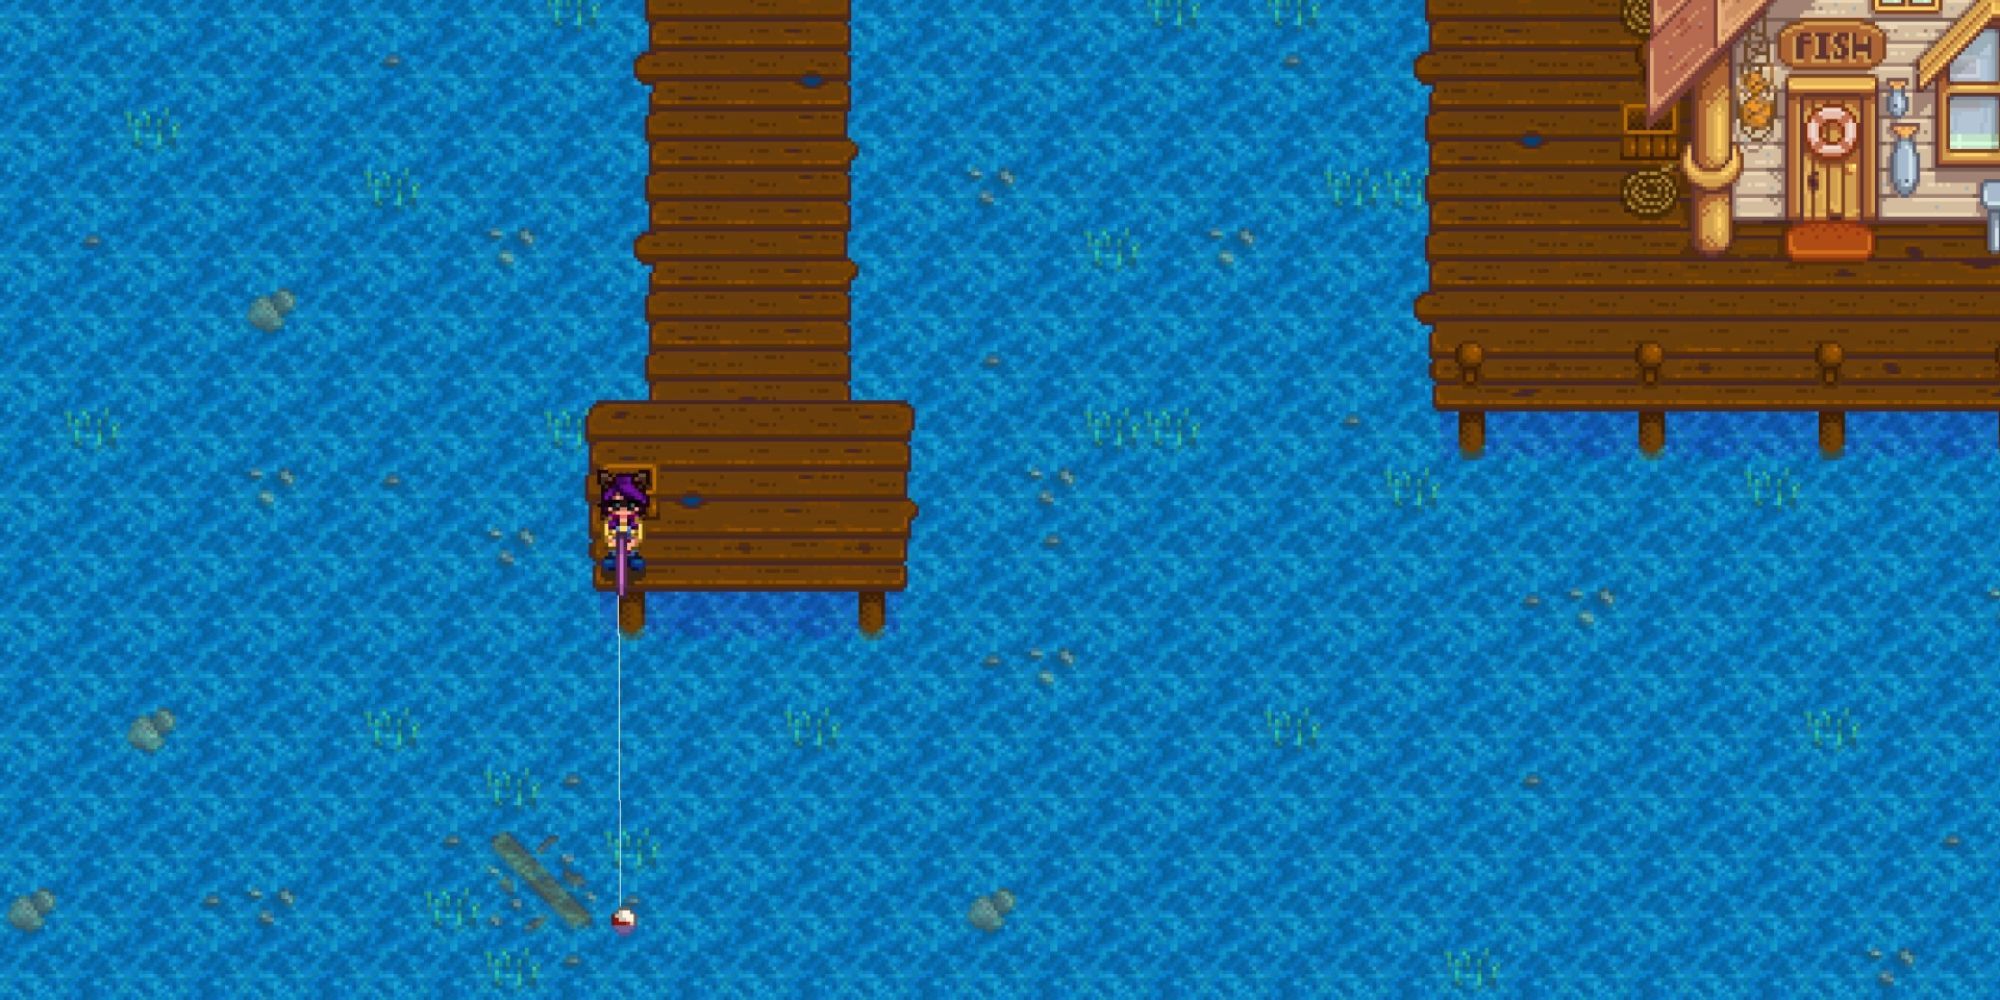 Stardew Valley player fishing on a dock